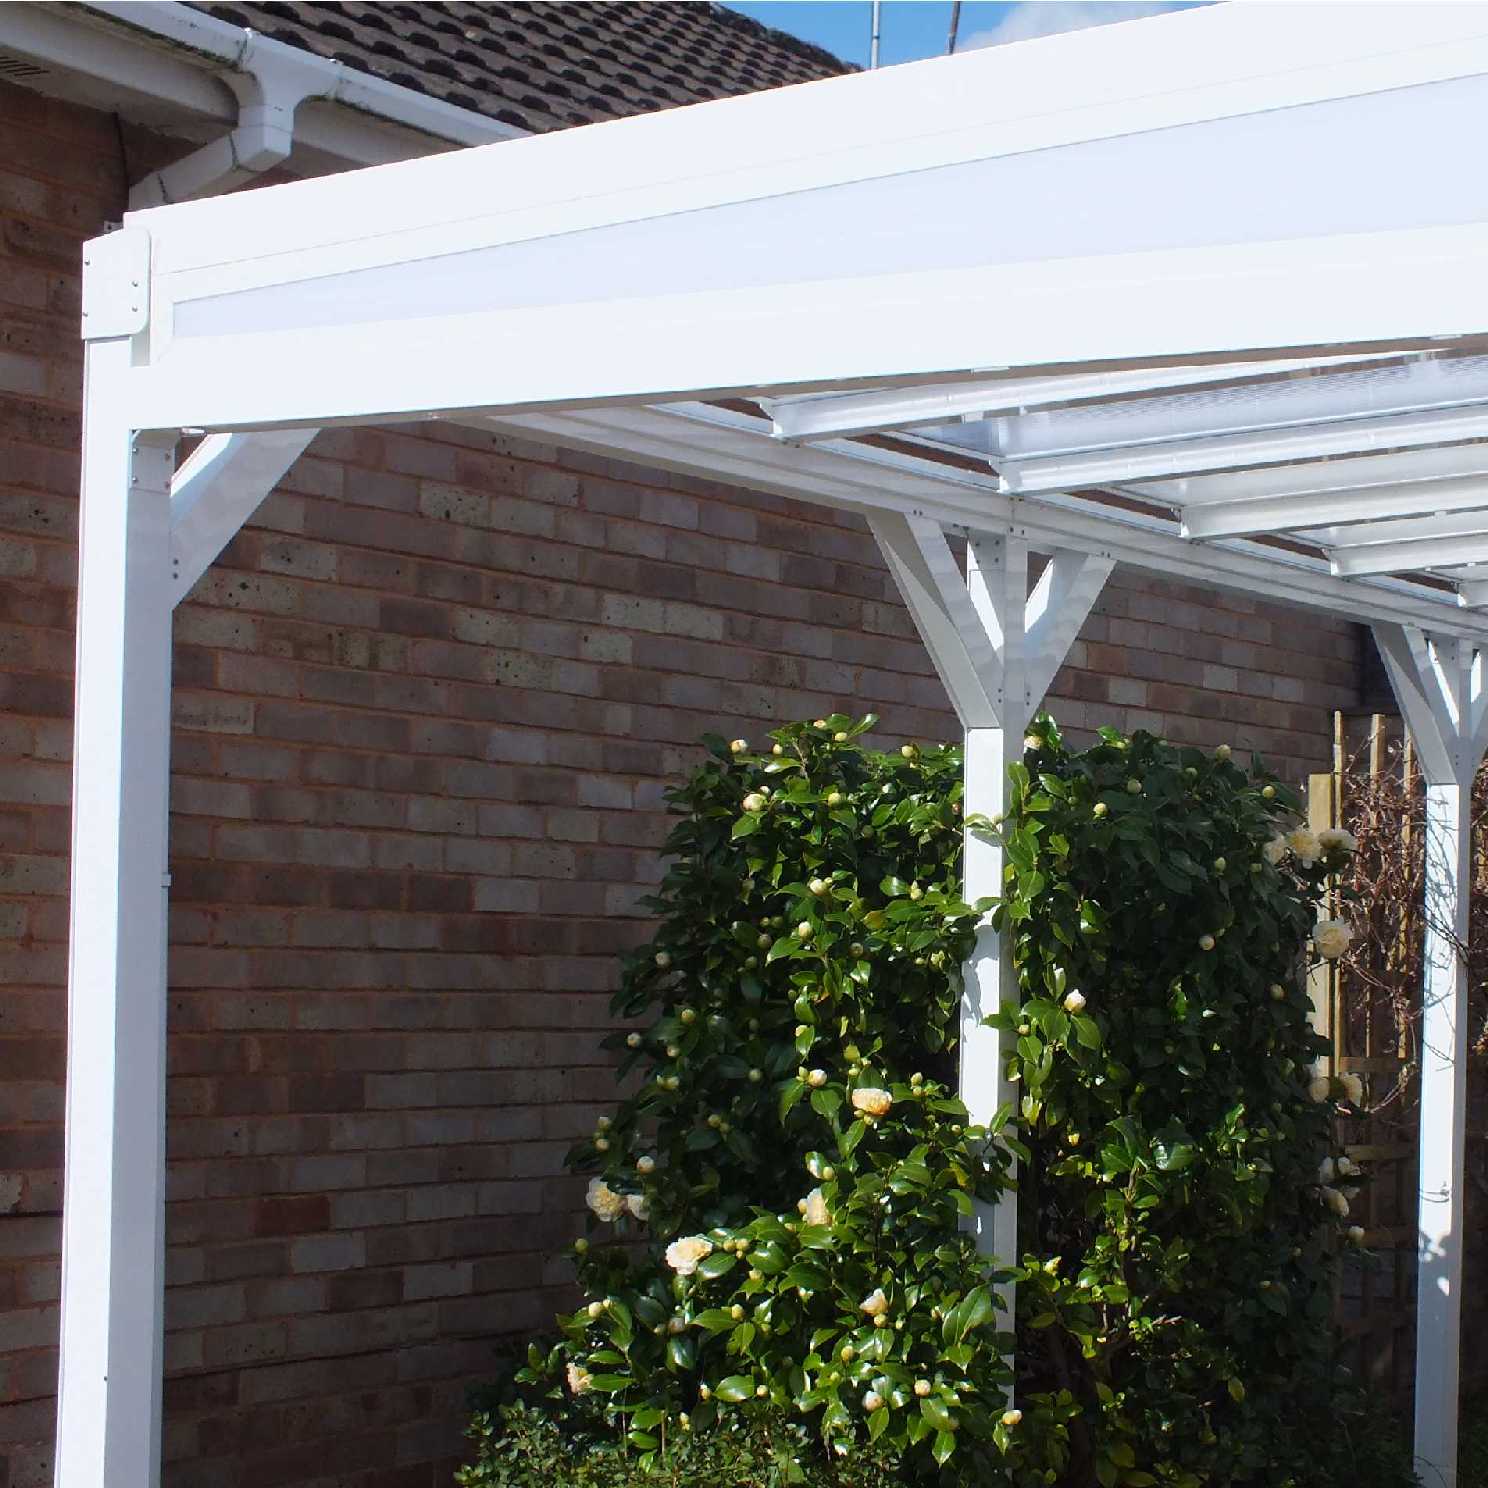 Omega Smart Lean-To Canopy, White with 16mm Polycarbonate Glazing - 6.0m (W) x 2.0m (P), (3) Supporting Posts from Omega Build